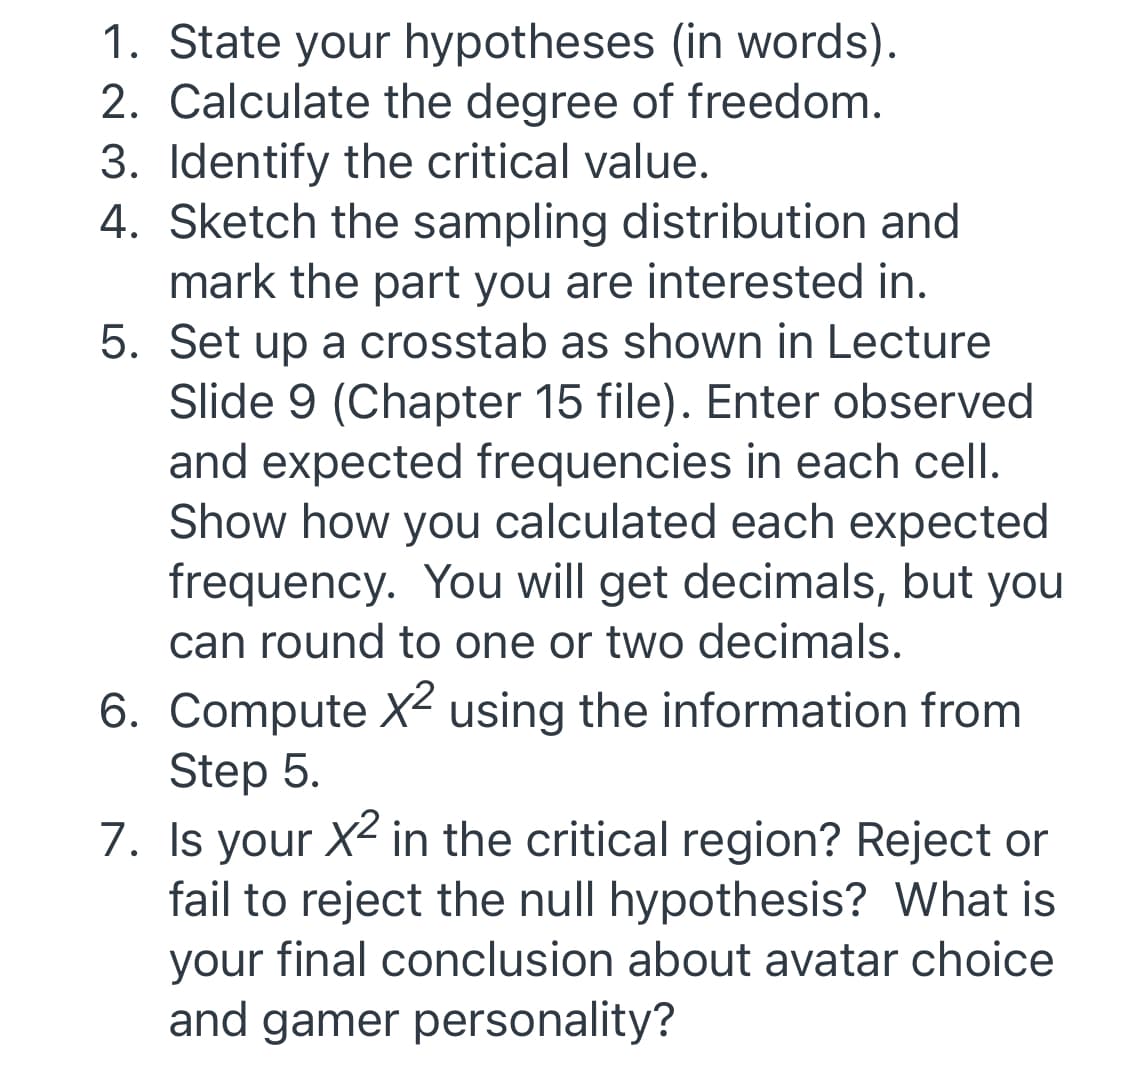 1. State your hypotheses (in words).
2. Calculate the degree of freedom.
3. Identify the critical value.
4. Sketch the sampling distribution and
mark the part you are interested in.
5. Set up a crosstab as shown in Lecture
Slide 9 (Chapter 15 file). Enter observed
and expected frequencies in each cell.
Show how you calculated each expected
frequency. You will get decimals, but you
can round to one or two decimals.
6. Compute X² using the information from
Step 5.
7. Is your X2 in the critical region? Reject or
fail to reject the null hypothesis? What is
your final conclusion about avatar choice
and gamer personality?
